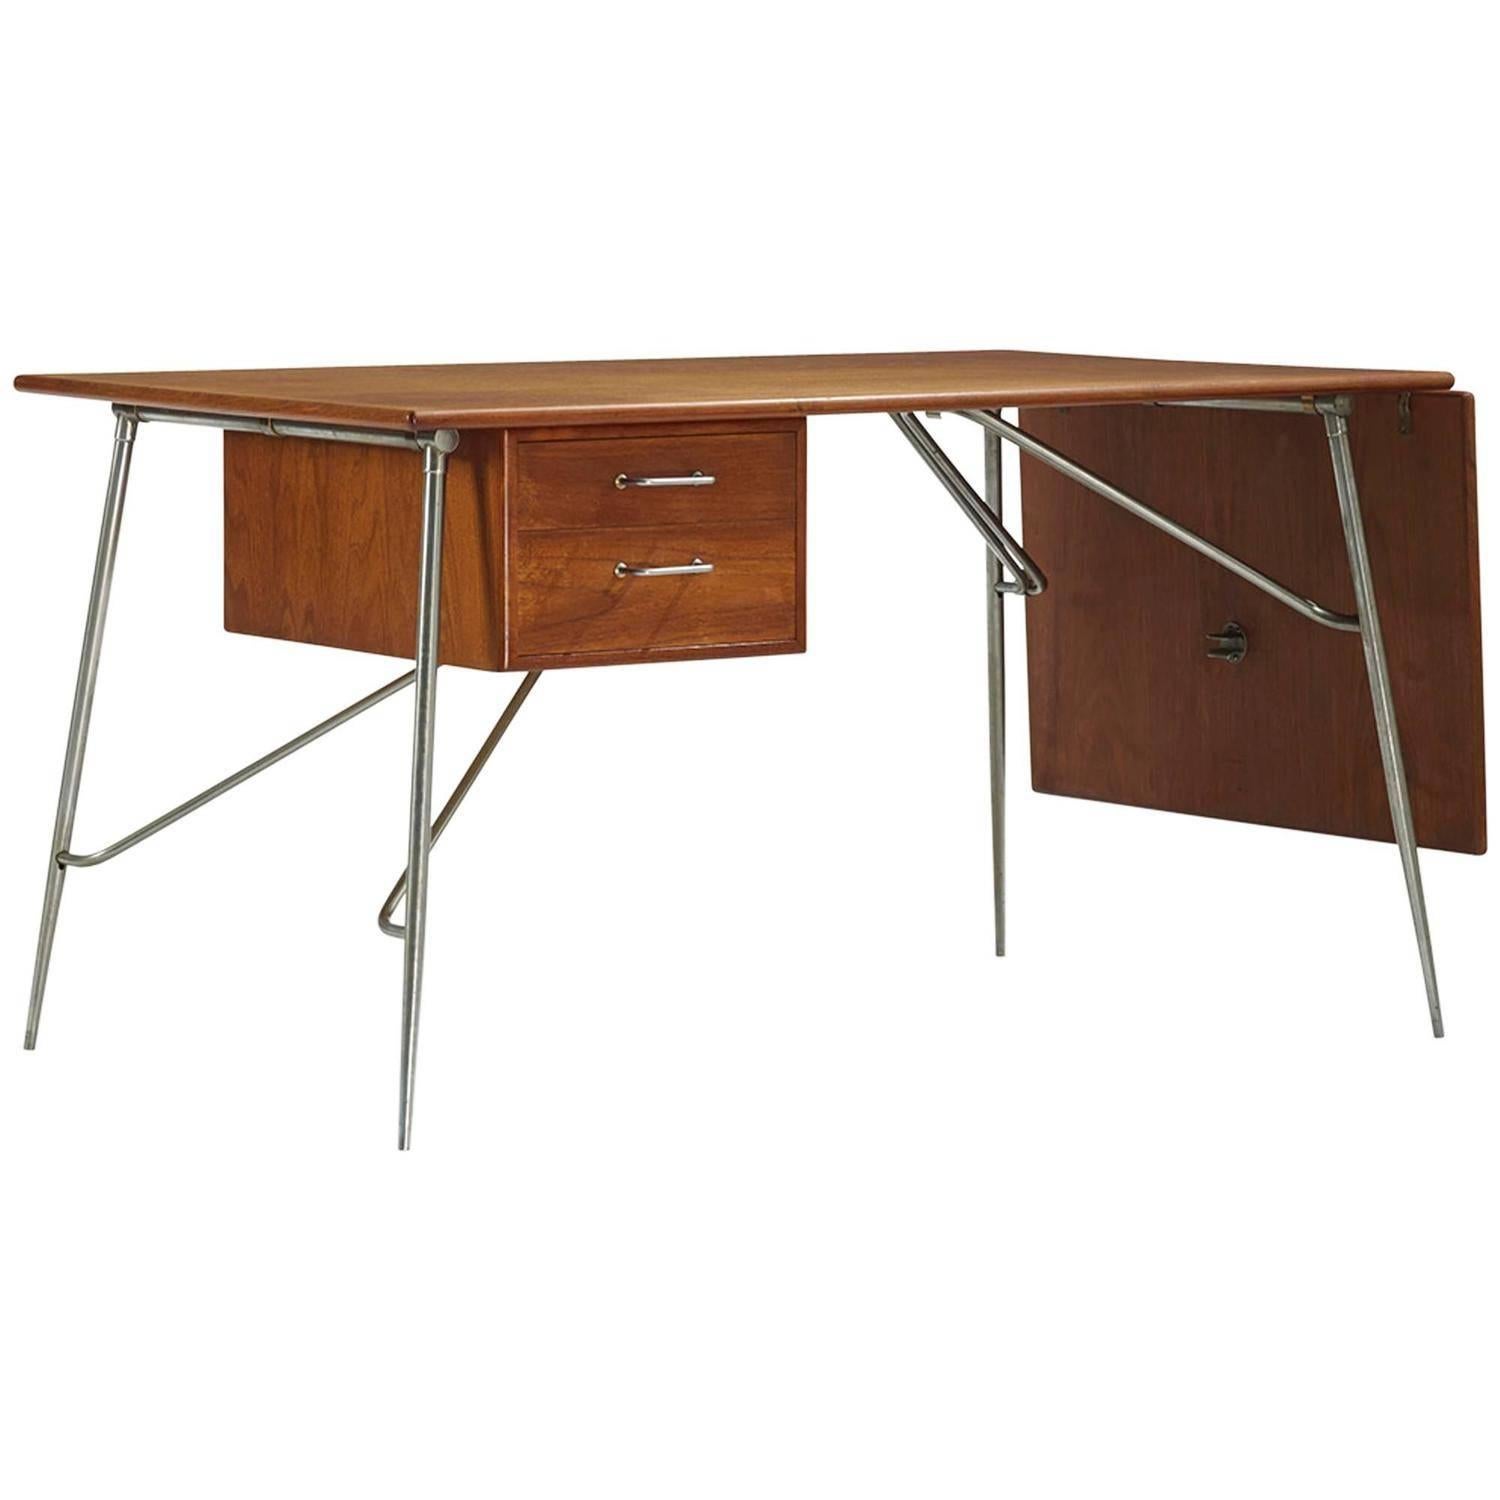 Offerd by Zitzo, Amsterdam Danish modernism writing or office desk in teak by Børge Mogensen.
Desk features one 48 cm drop-leaf; table measures 132 cm and 180 cm when fully extended. Base in matte chrome-plated steel.

Literature: Børge Mogensen,